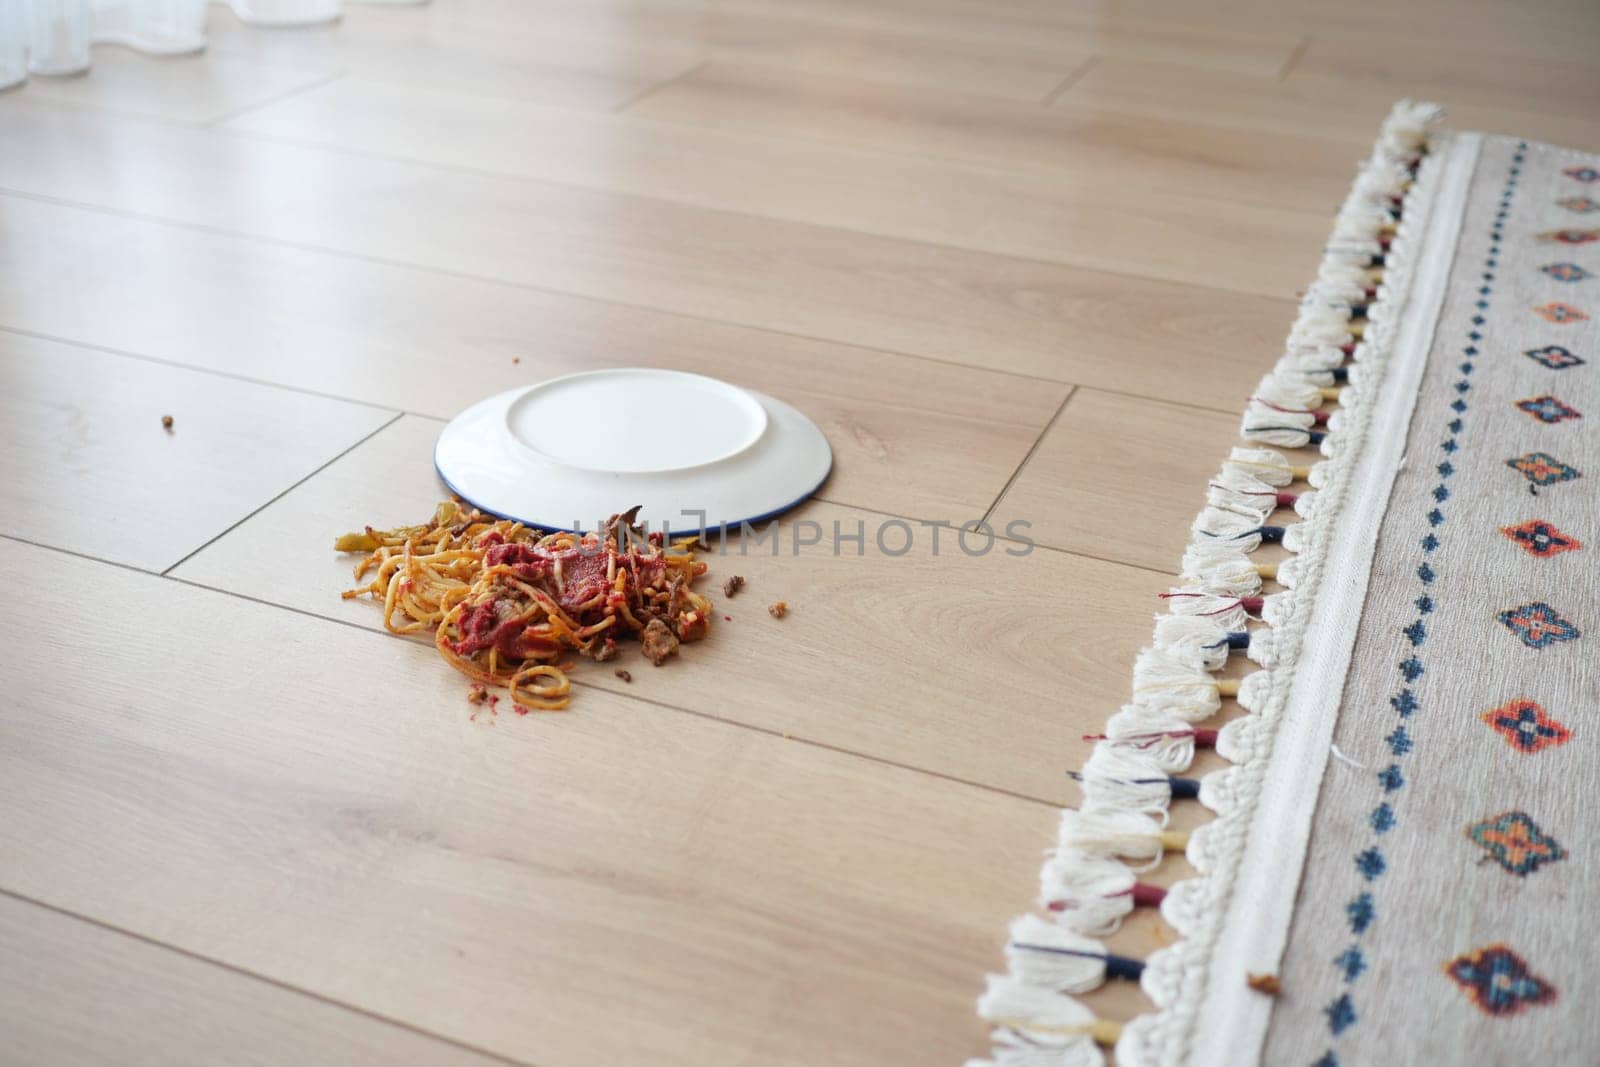 Spaghetti and sauce spilled on floor. by towfiq007